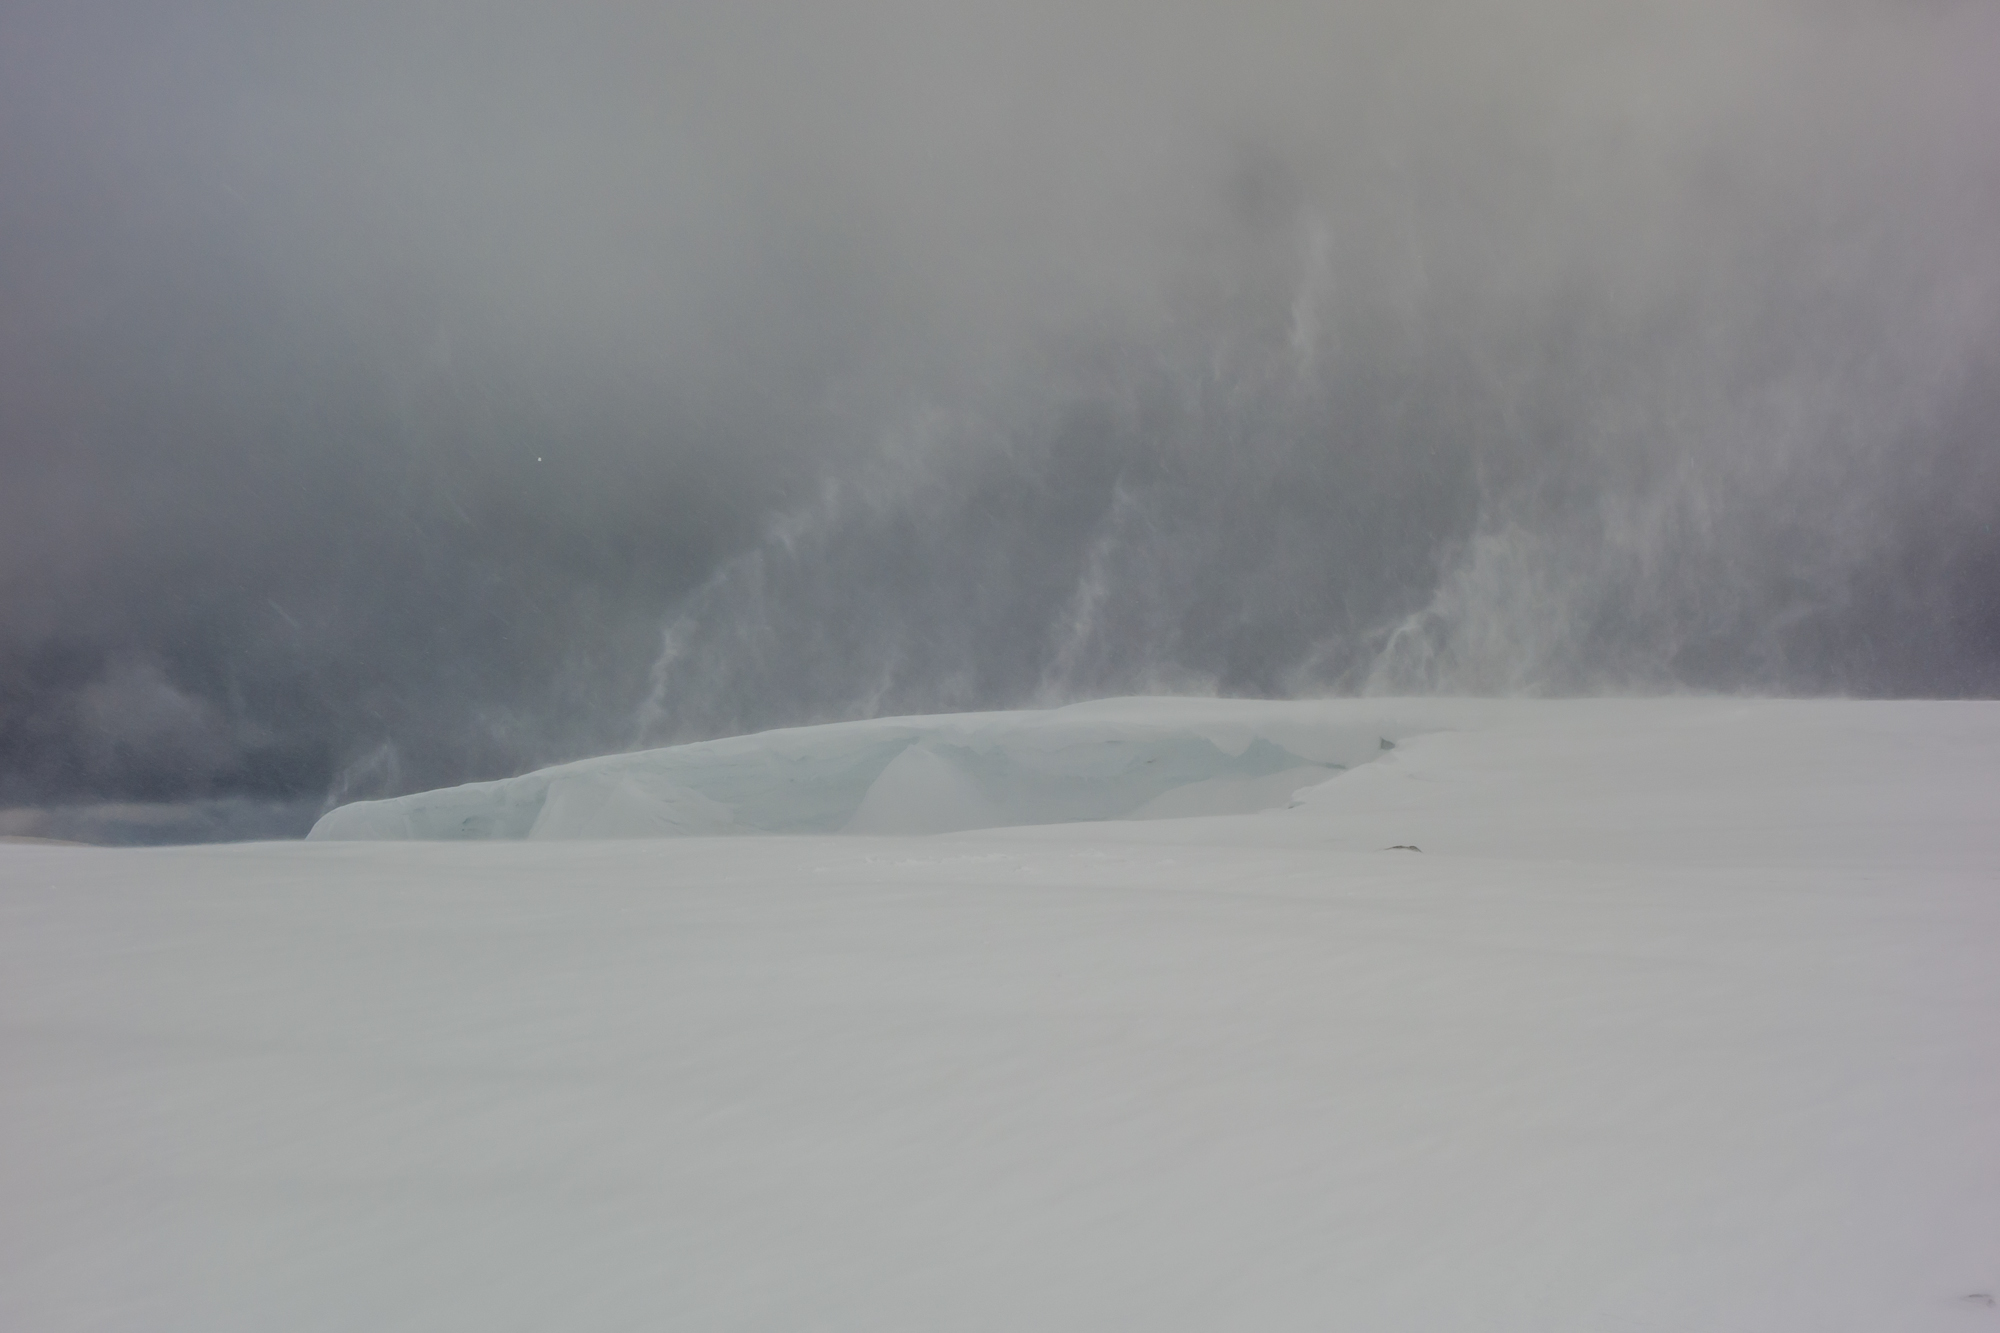 Spindrift plumes race off the top of the huge cornices - we daren't get any closer than this!